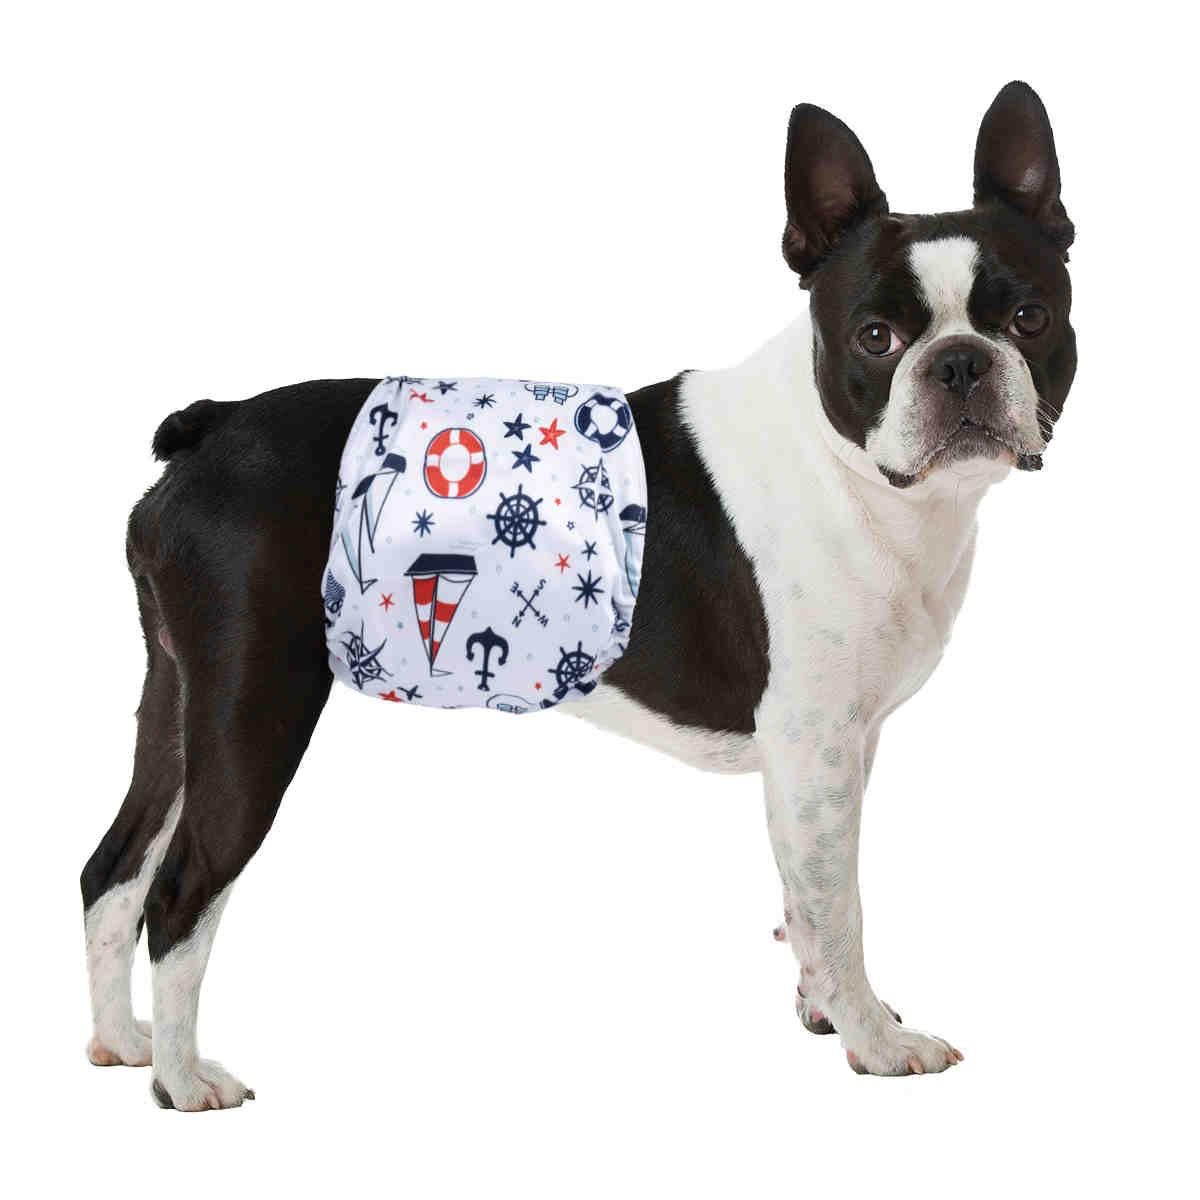 Washable Male Dog Diapers, Reusable Doggy Diapers